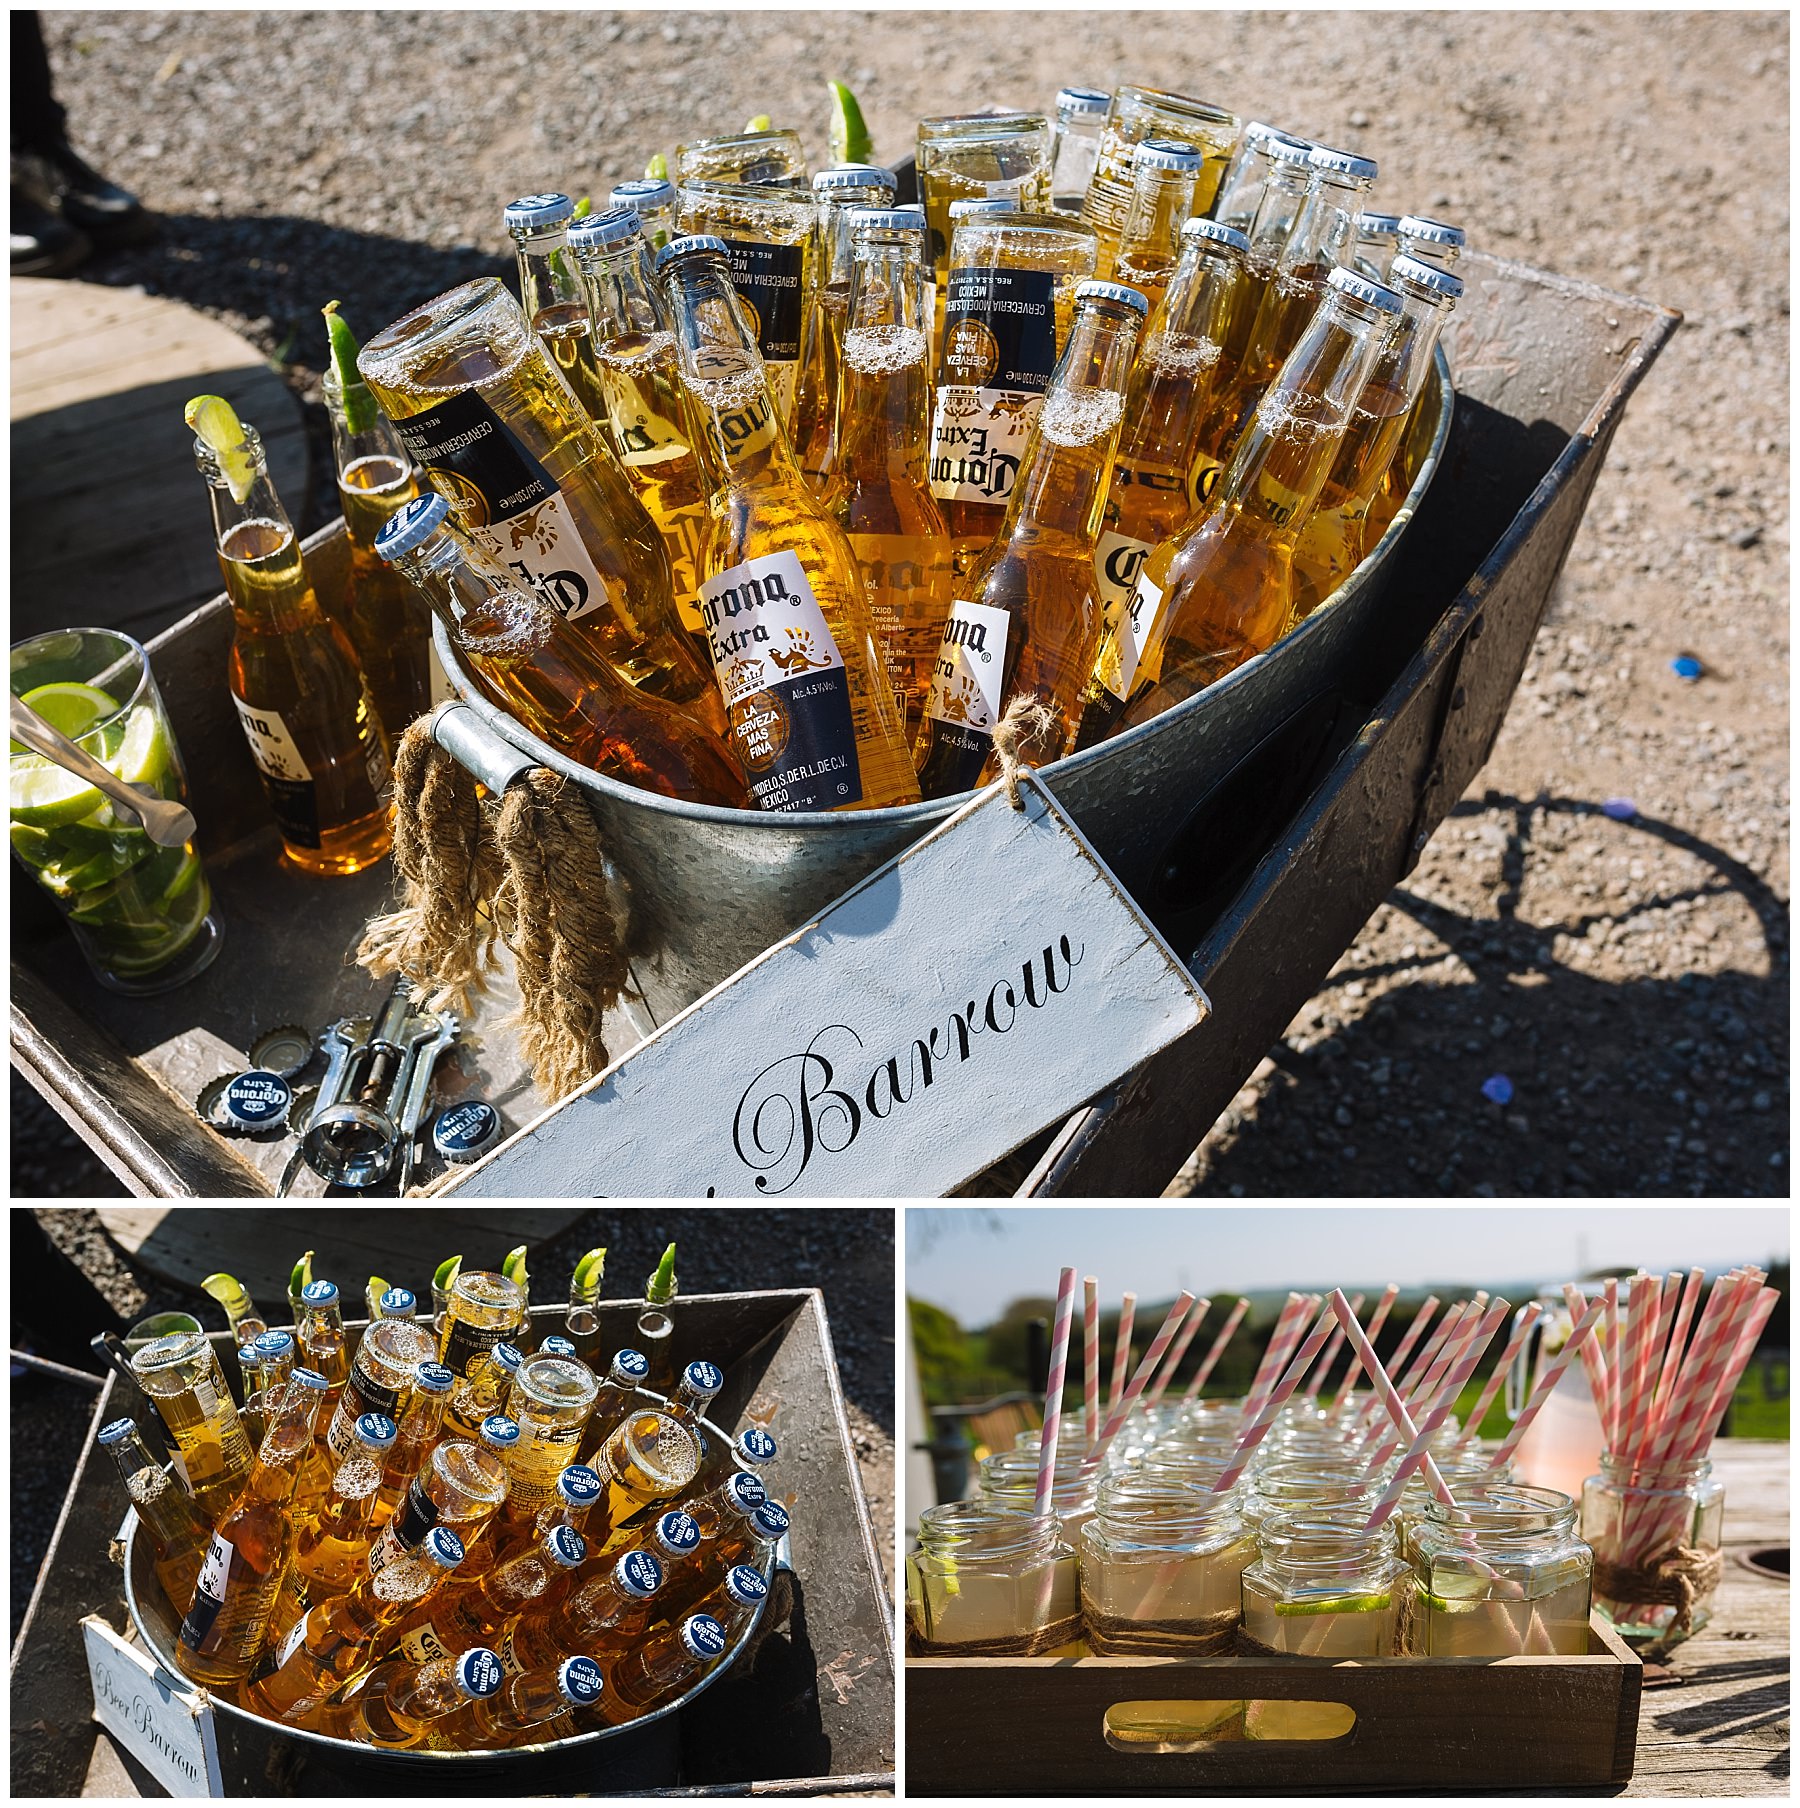 Drinks reception at the wellbeing farm